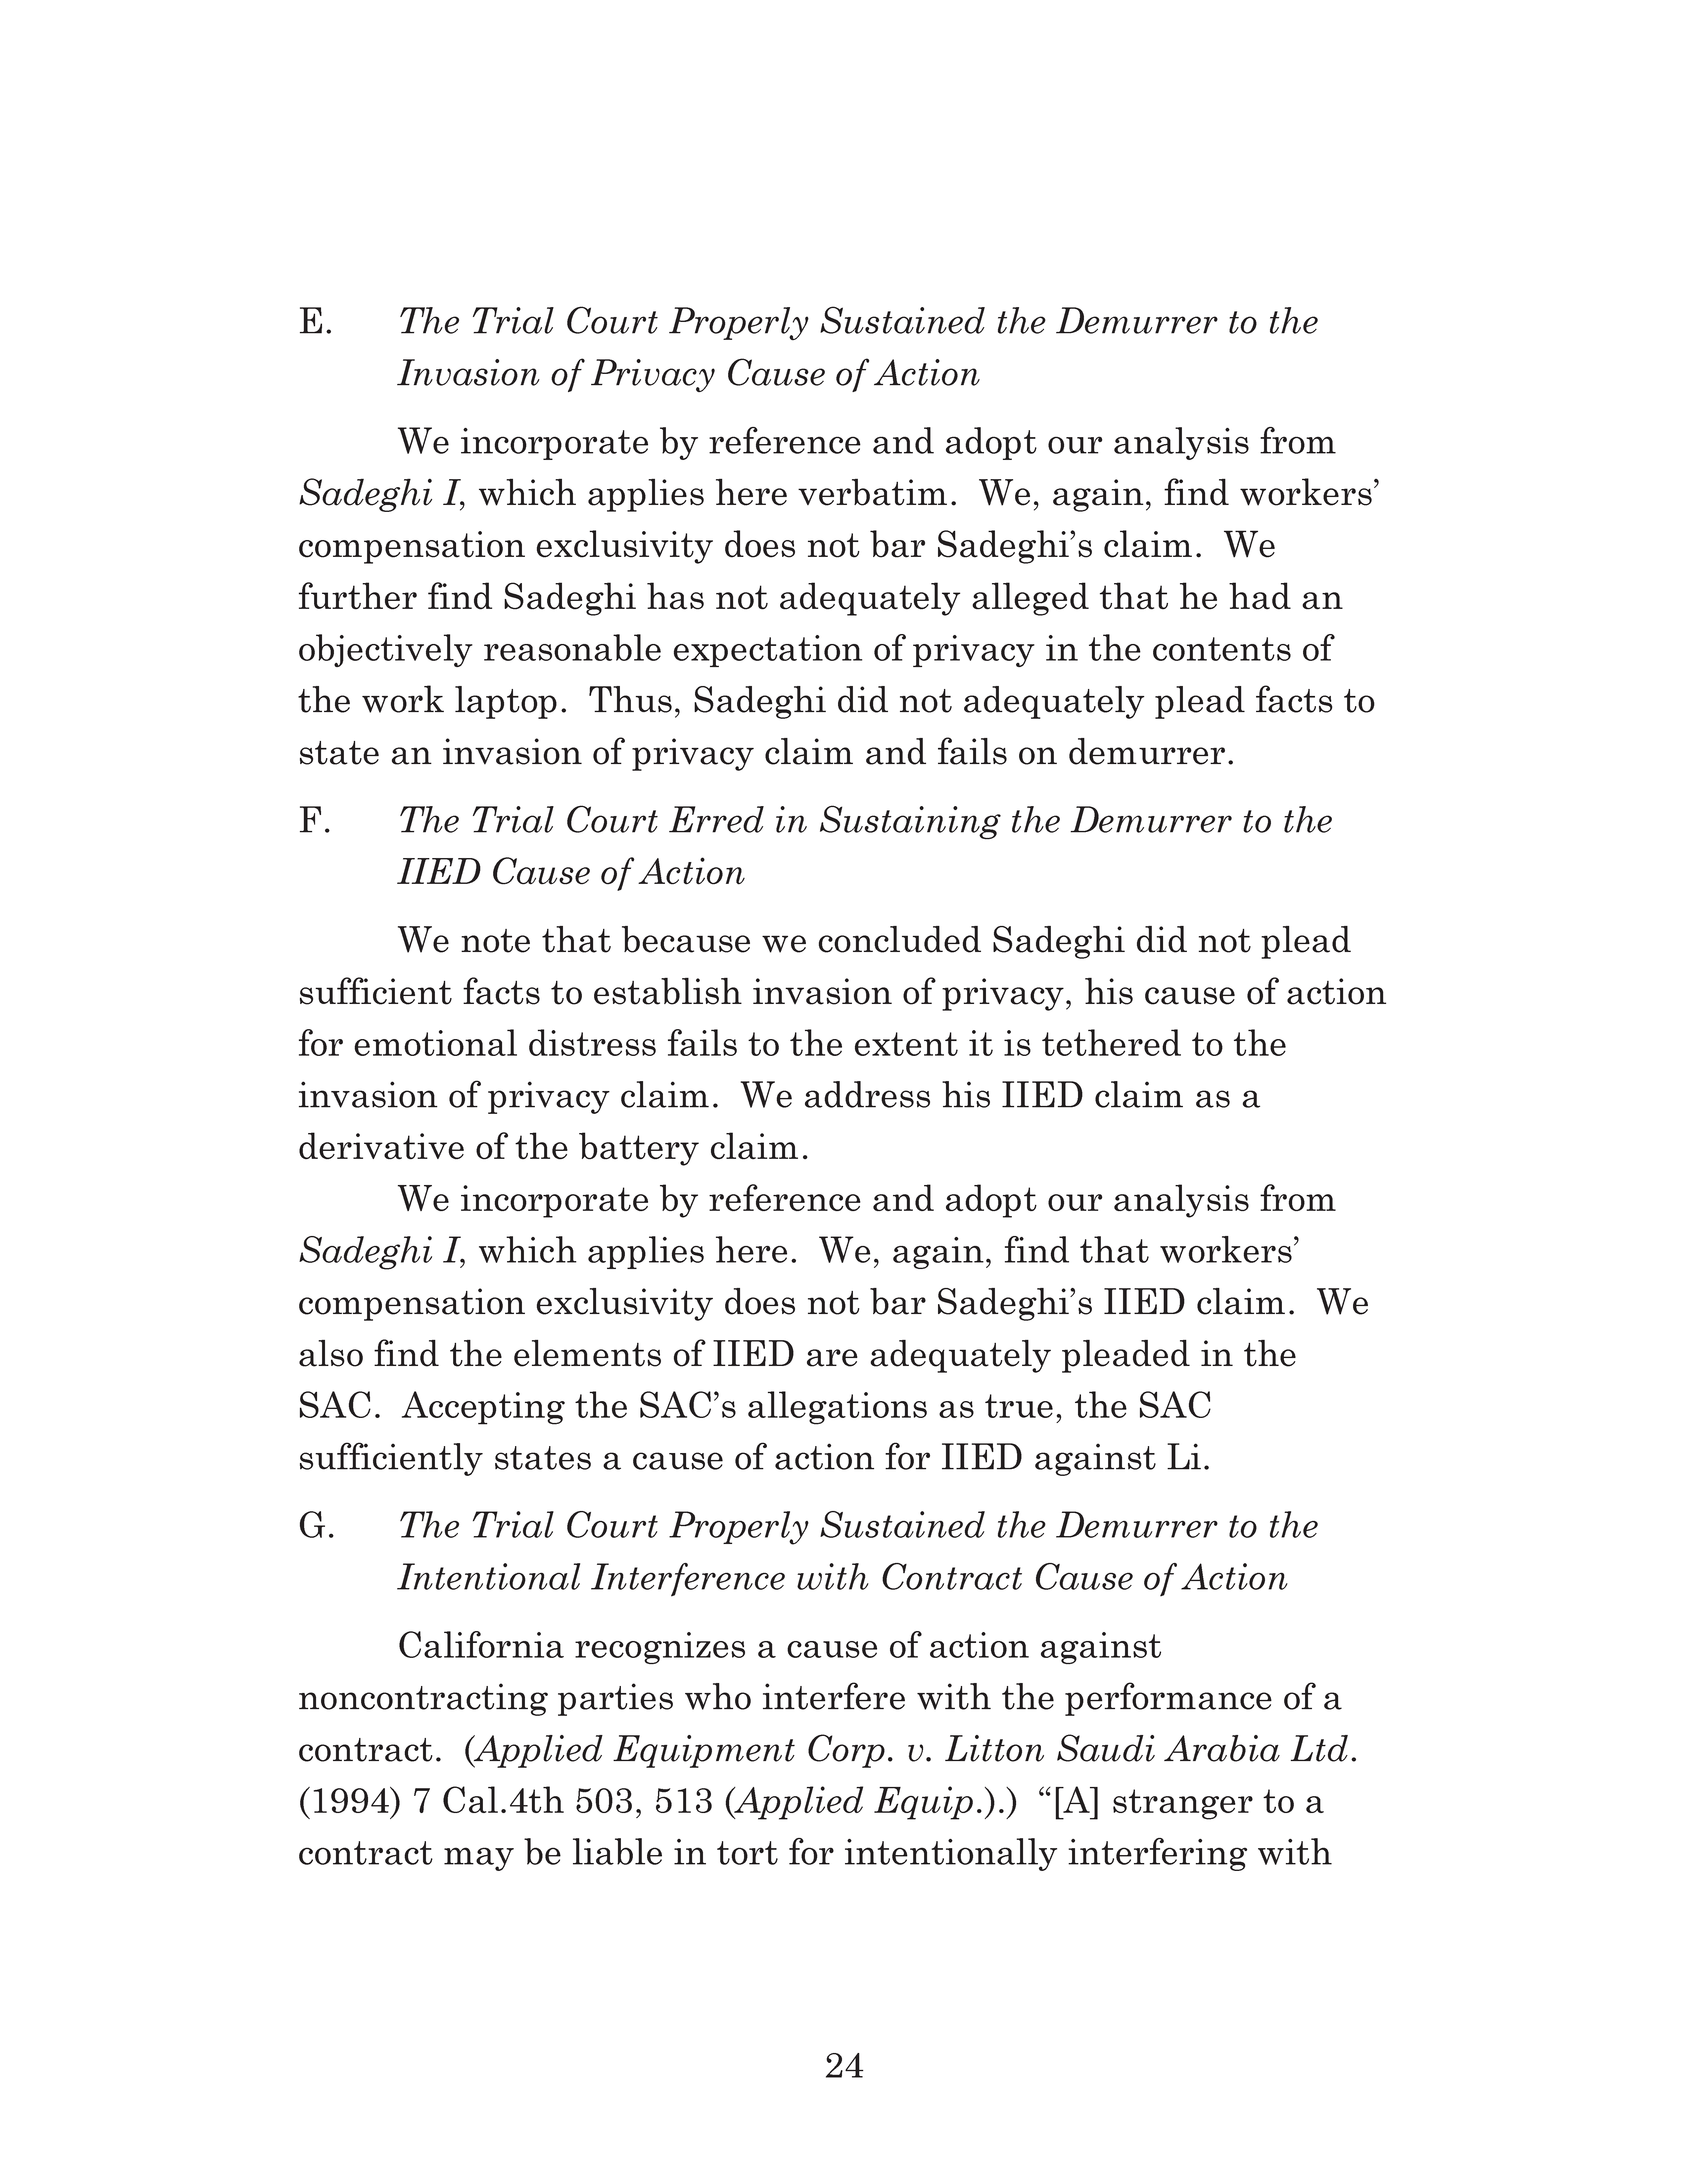 Appellate Court's Opinion Upholding Sadeghi's Claims for Fraud, Battery and IIED Against Li Page 24